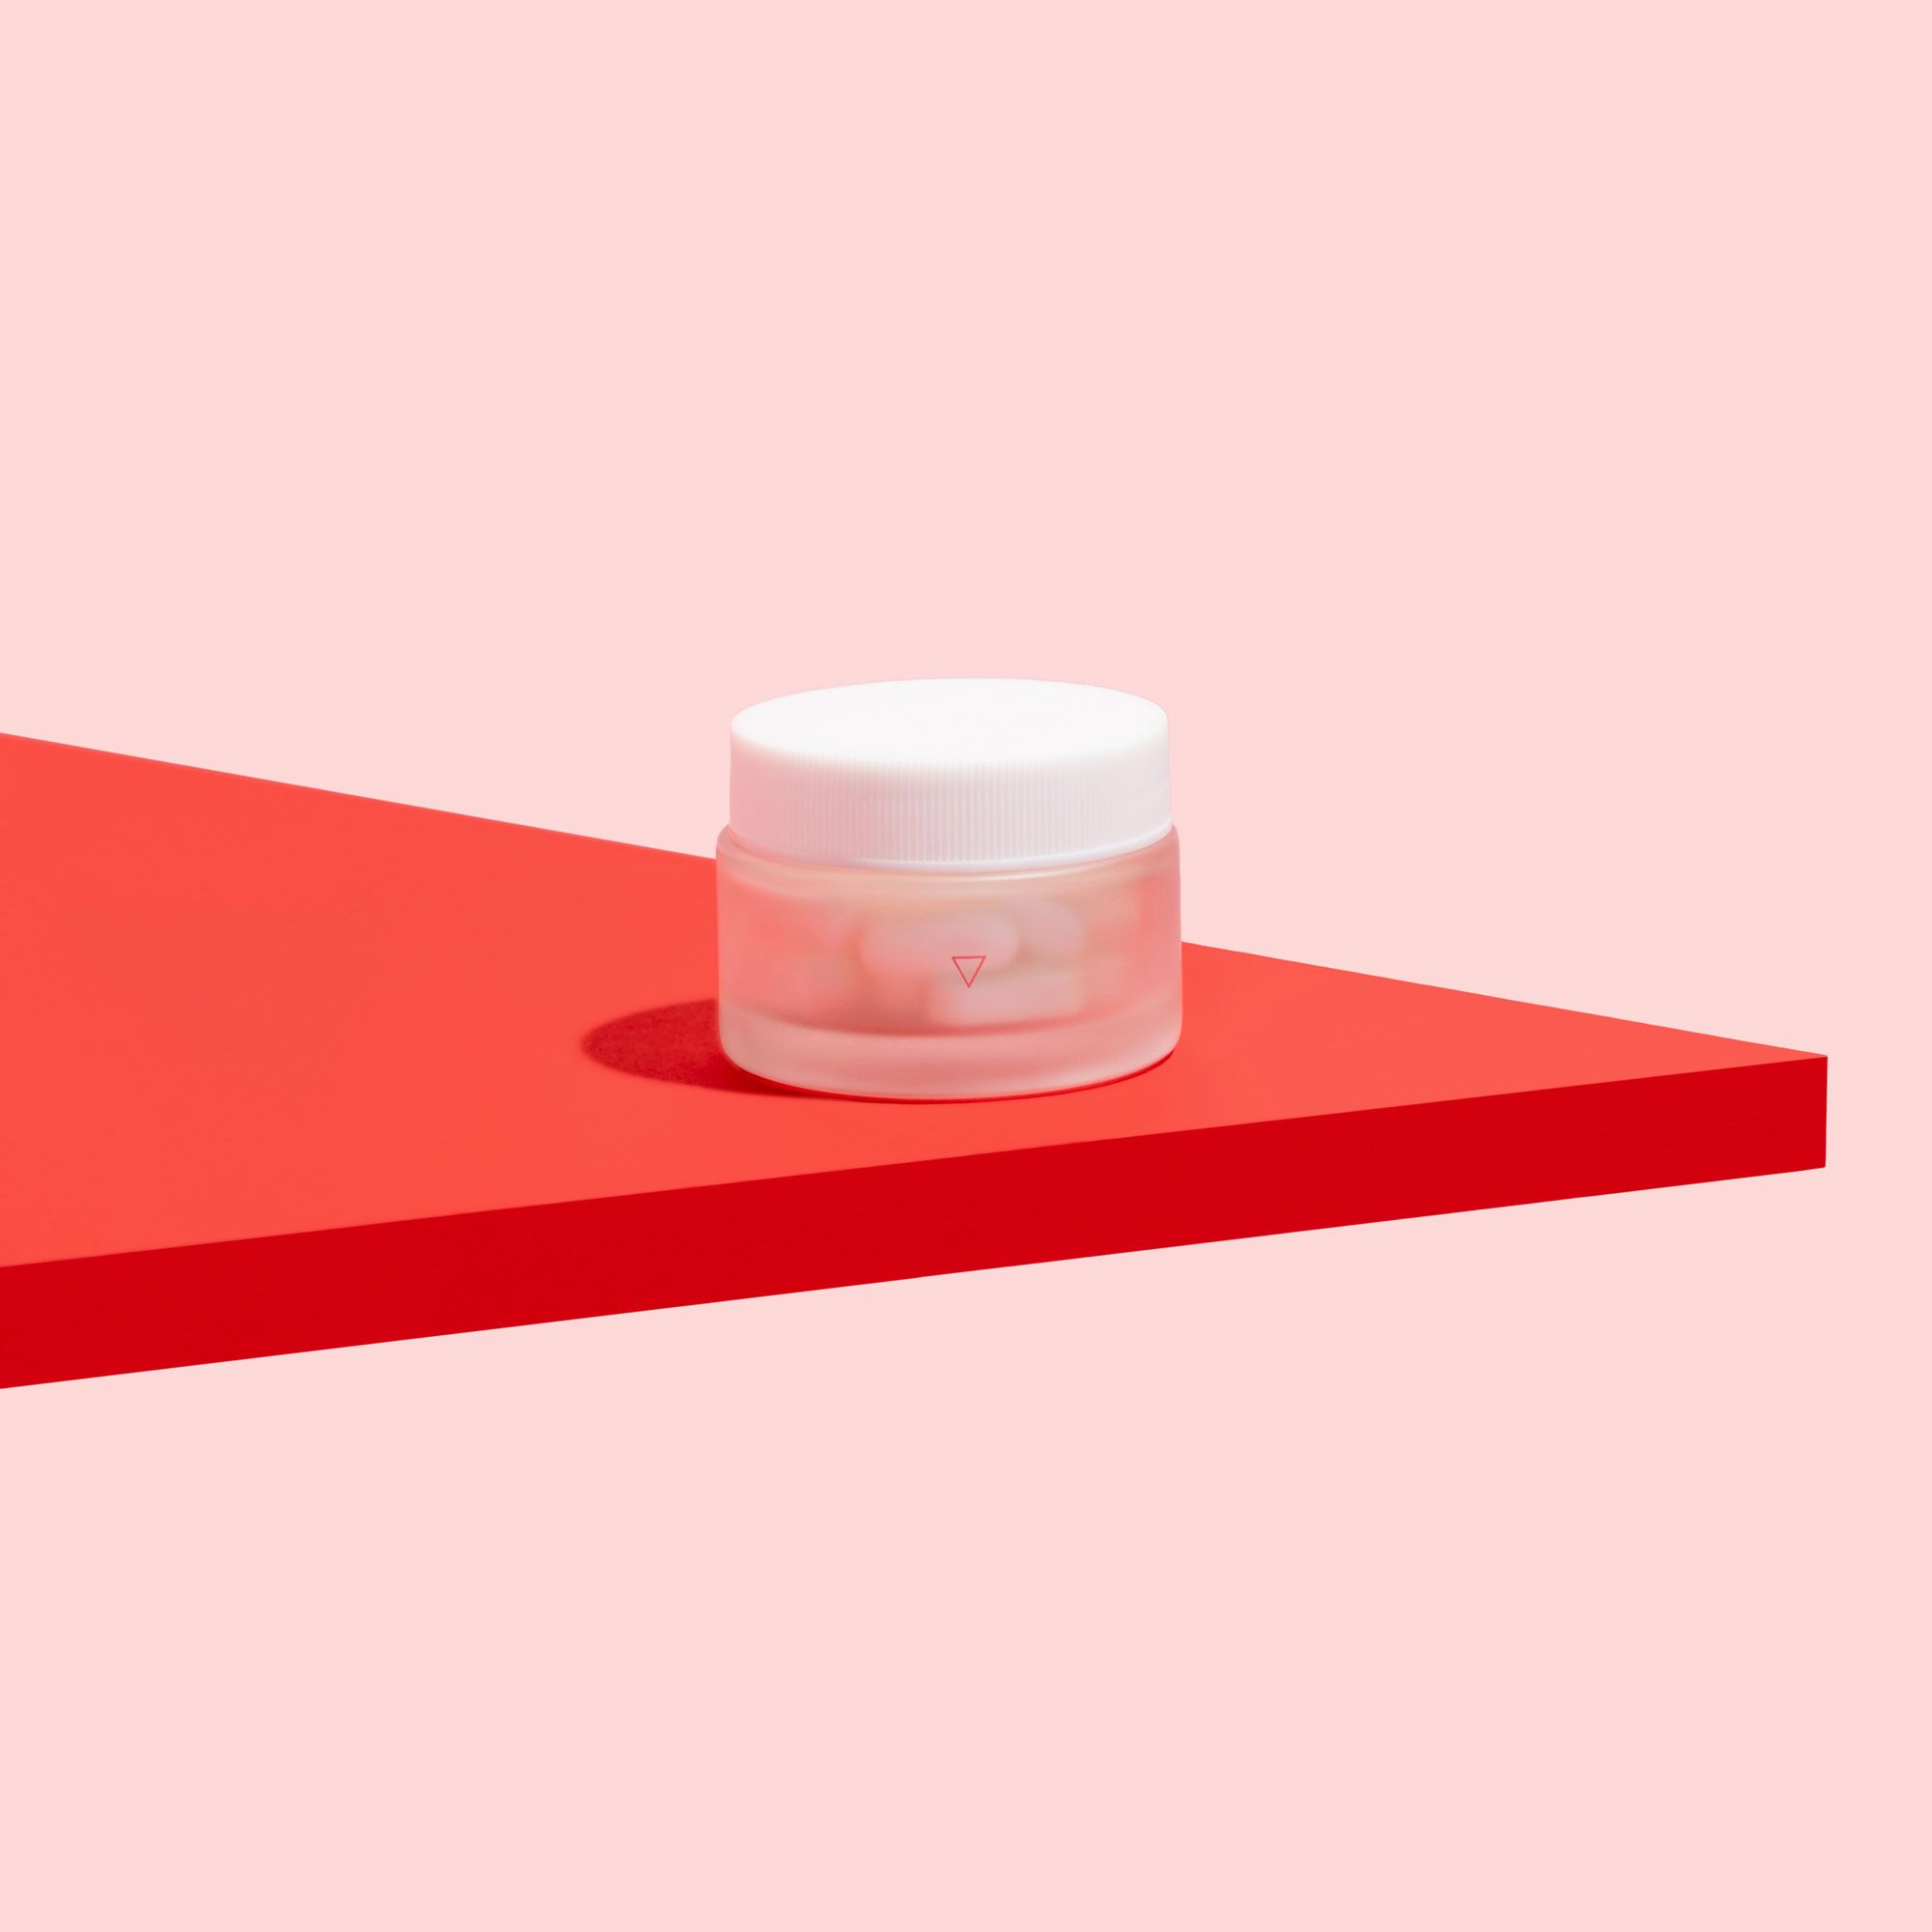 Pill bottle on red board with pink background